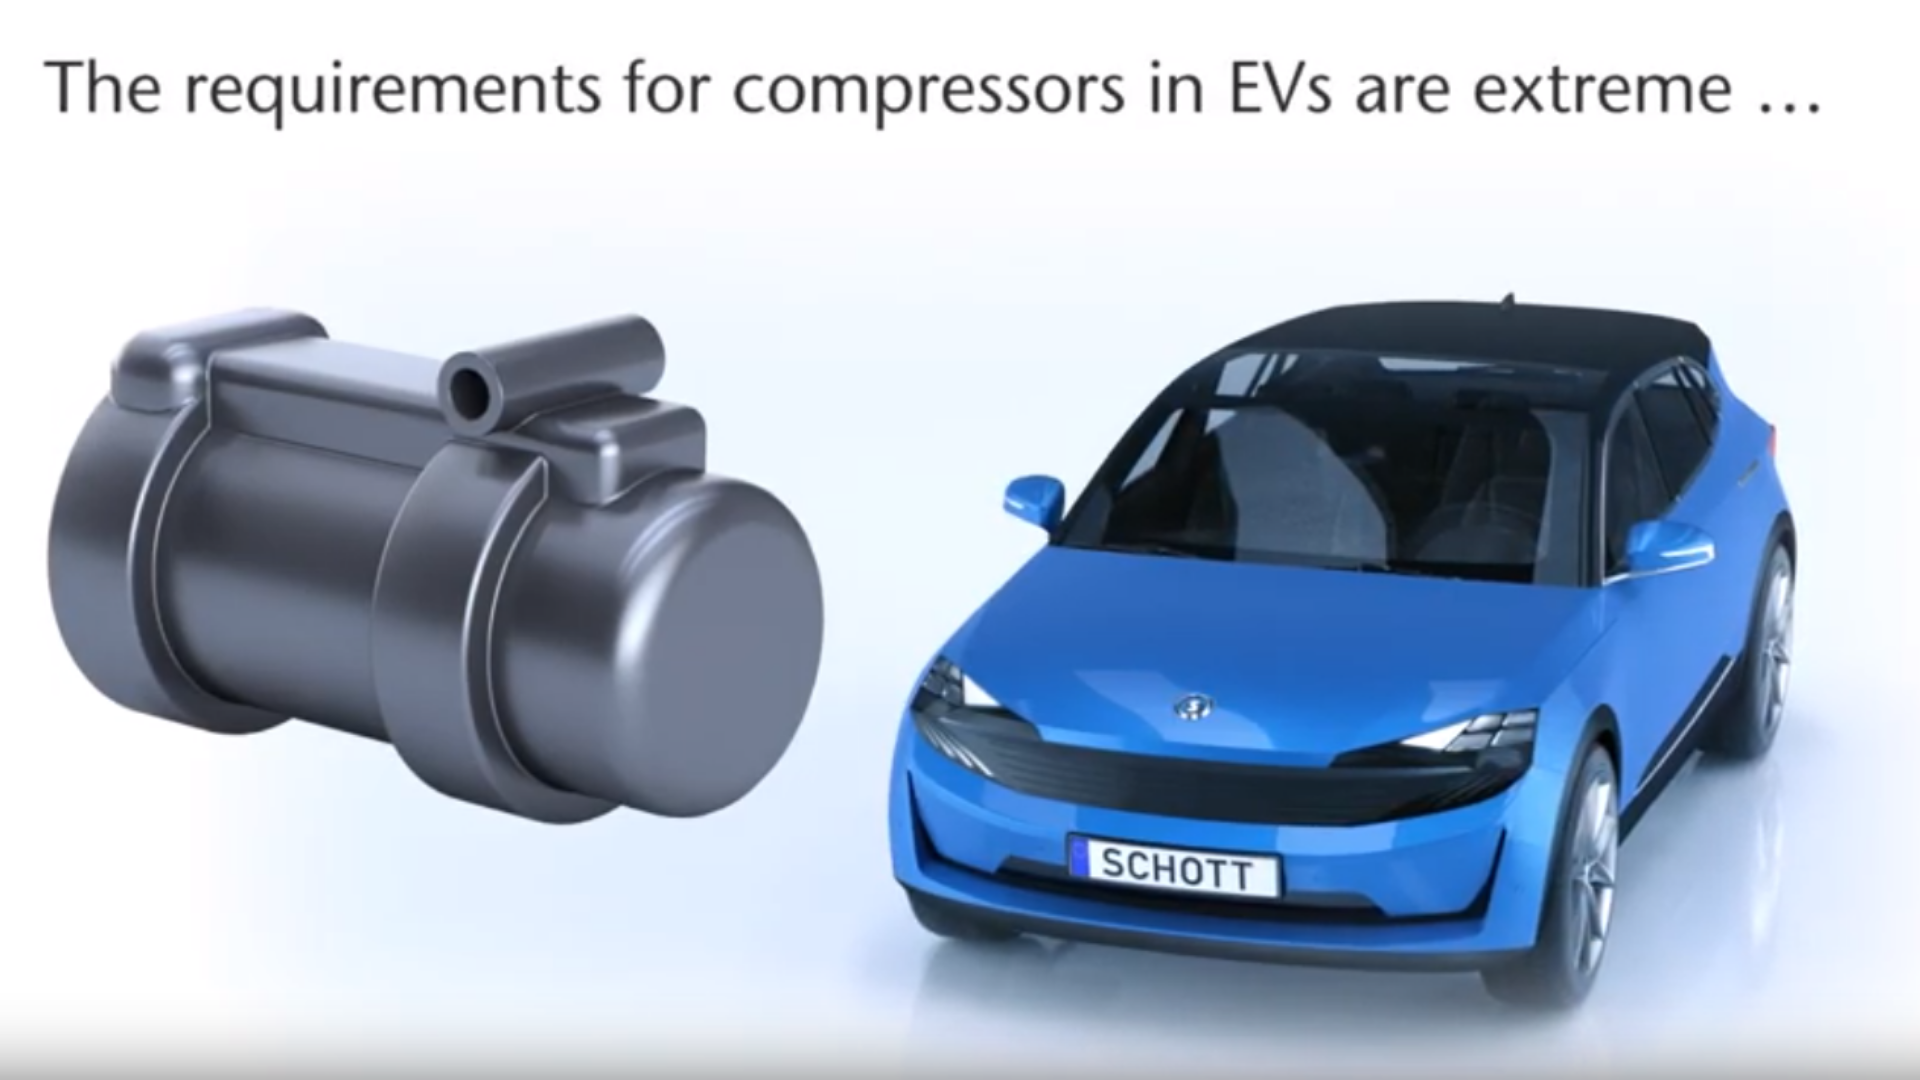 Click to find out why high quality compressor terminals are so important in automotive air conditioning systems